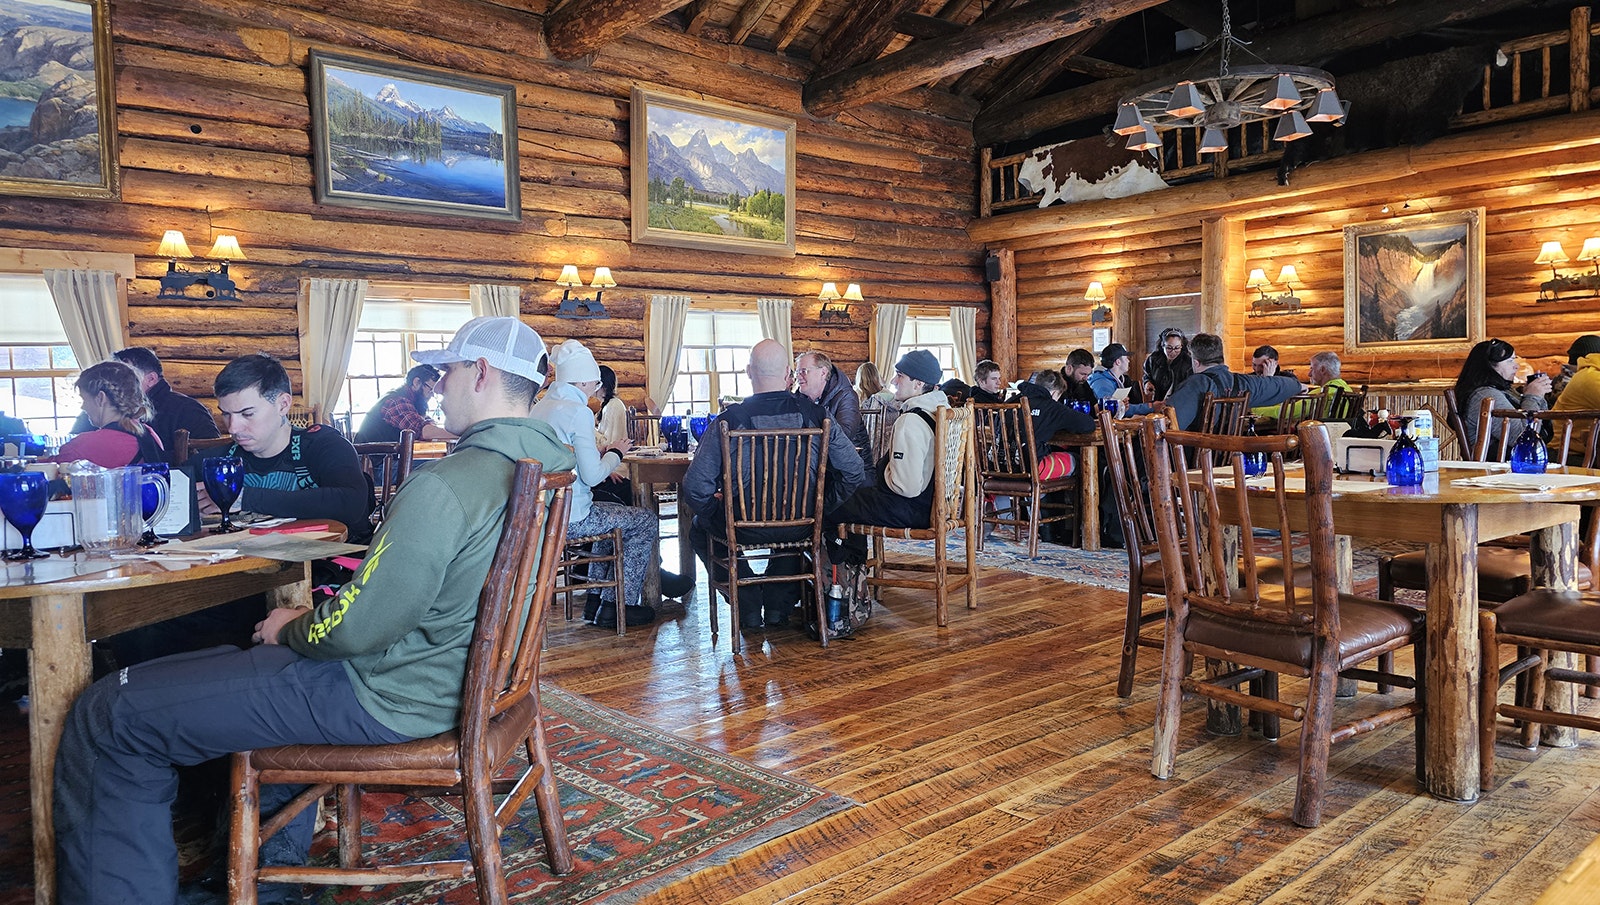 Mortimer the Moose's view of a busy dining hall on most any day during snowmobiling season at Brooks Lake Lodge.